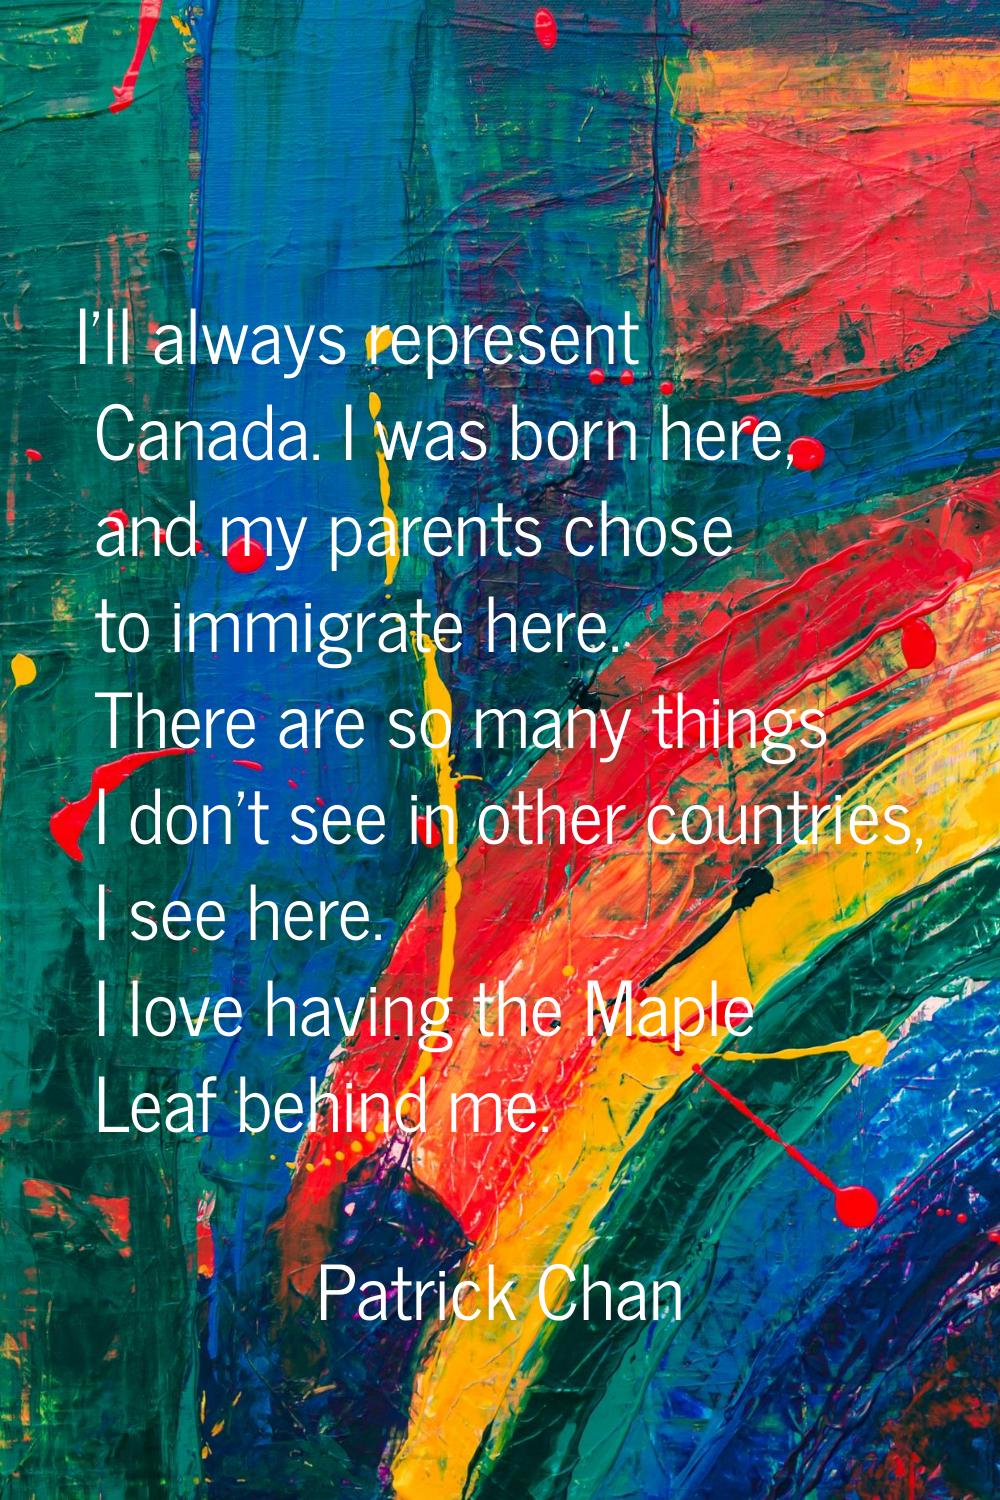 I'll always represent Canada. I was born here, and my parents chose to immigrate here. There are so